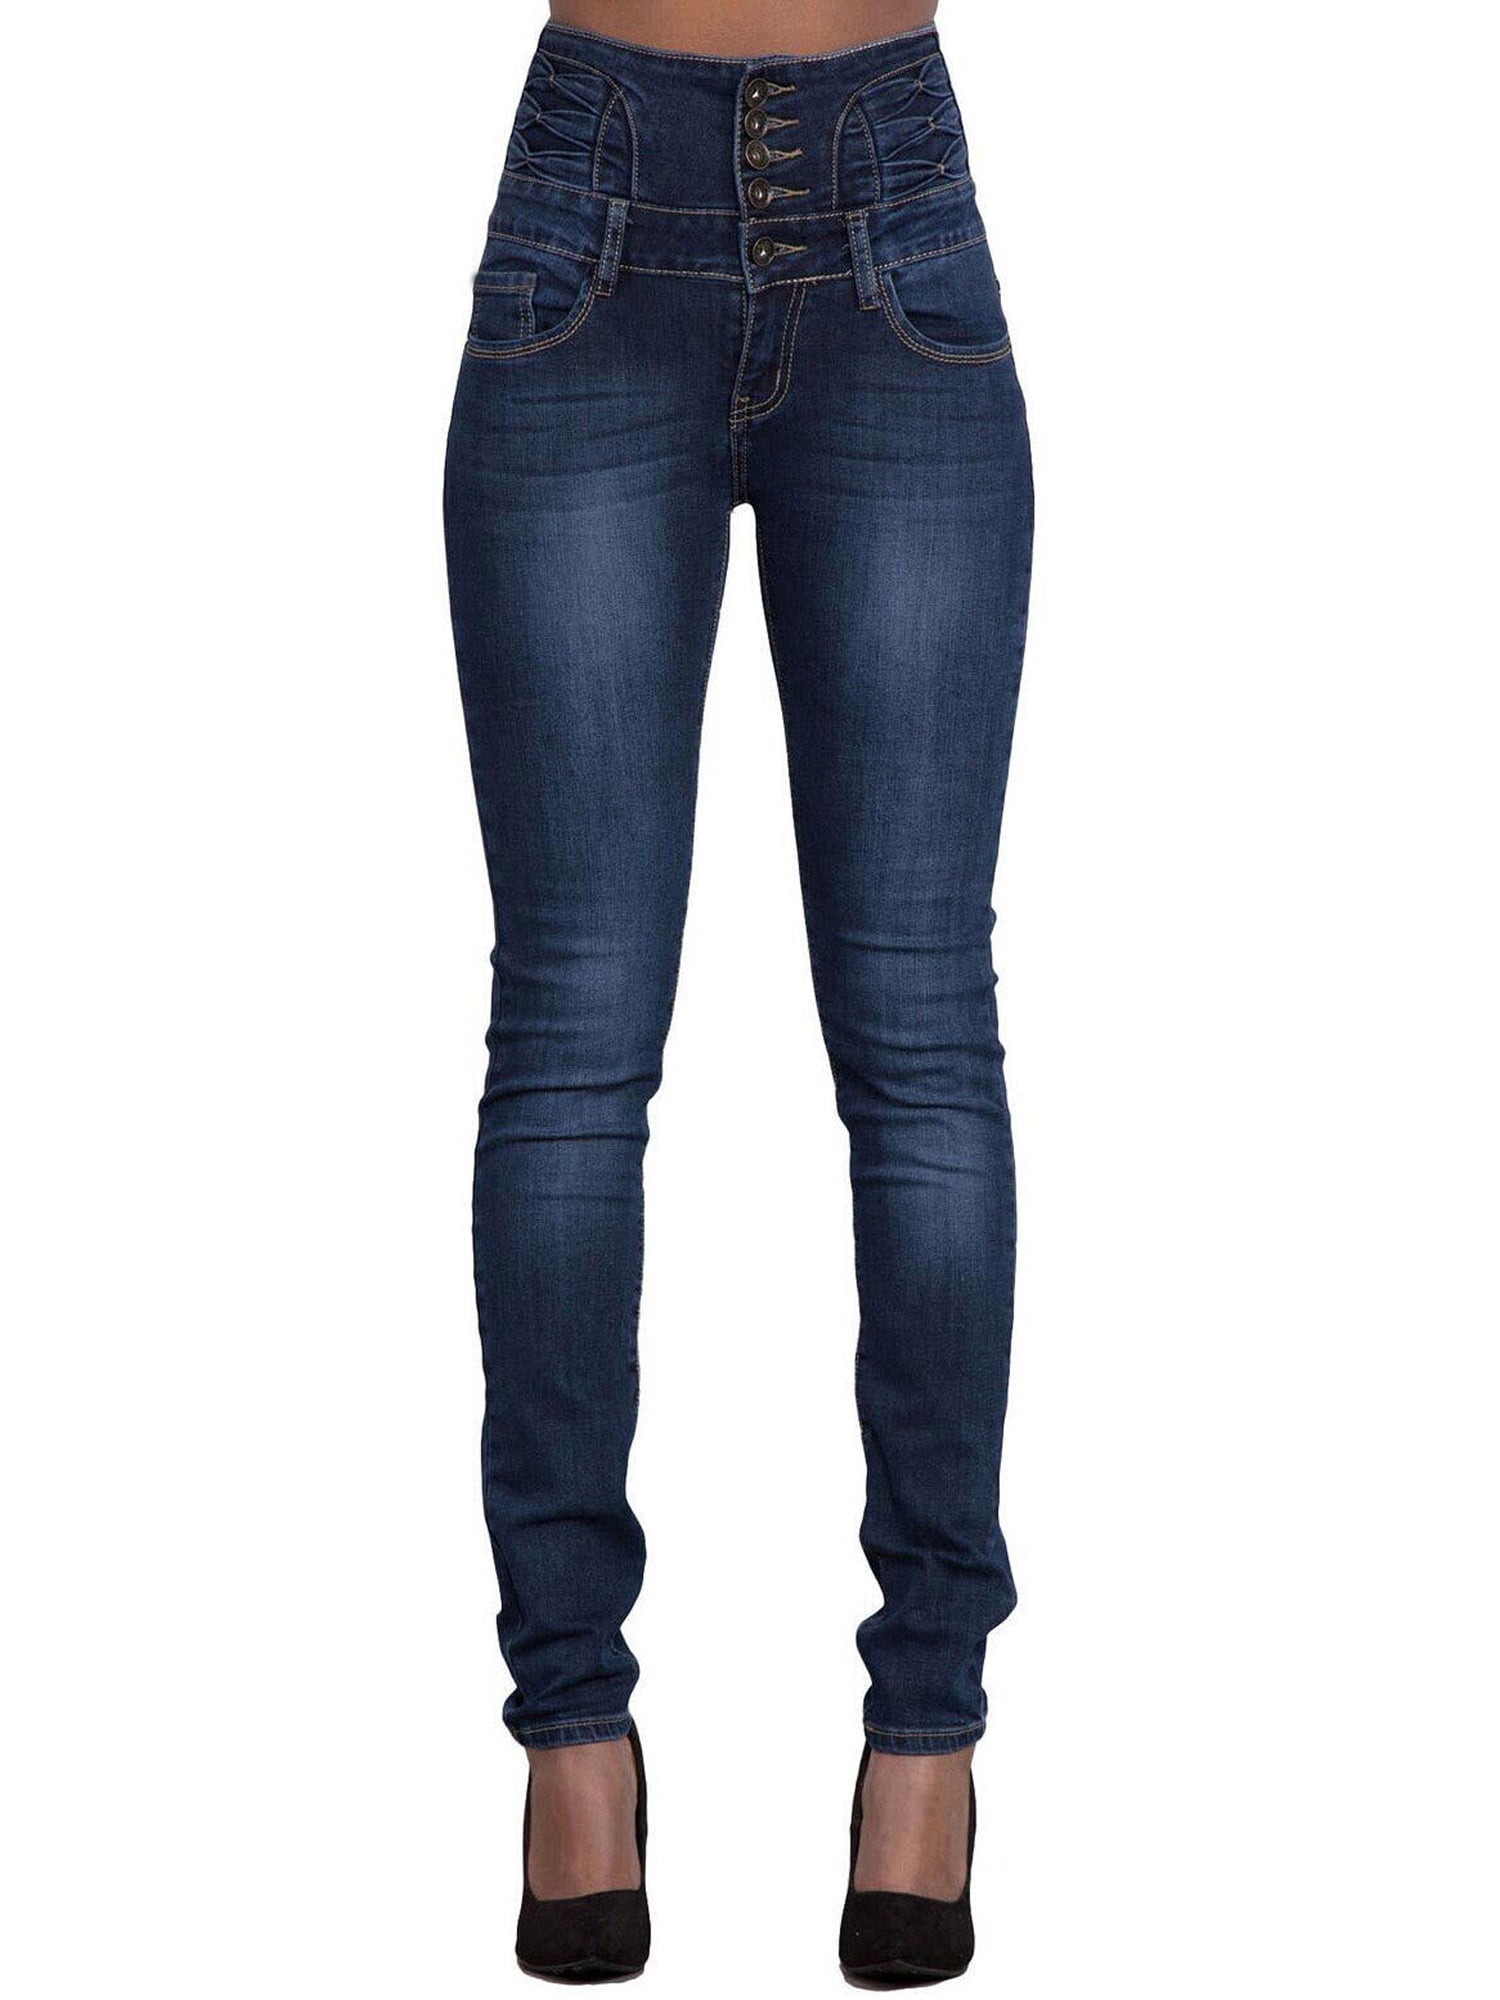 scaling ❤Jeans for Women Pants Women Denim Skinny Ripped Pants High Waist Stretch Jeans Slim Pencil Trousers